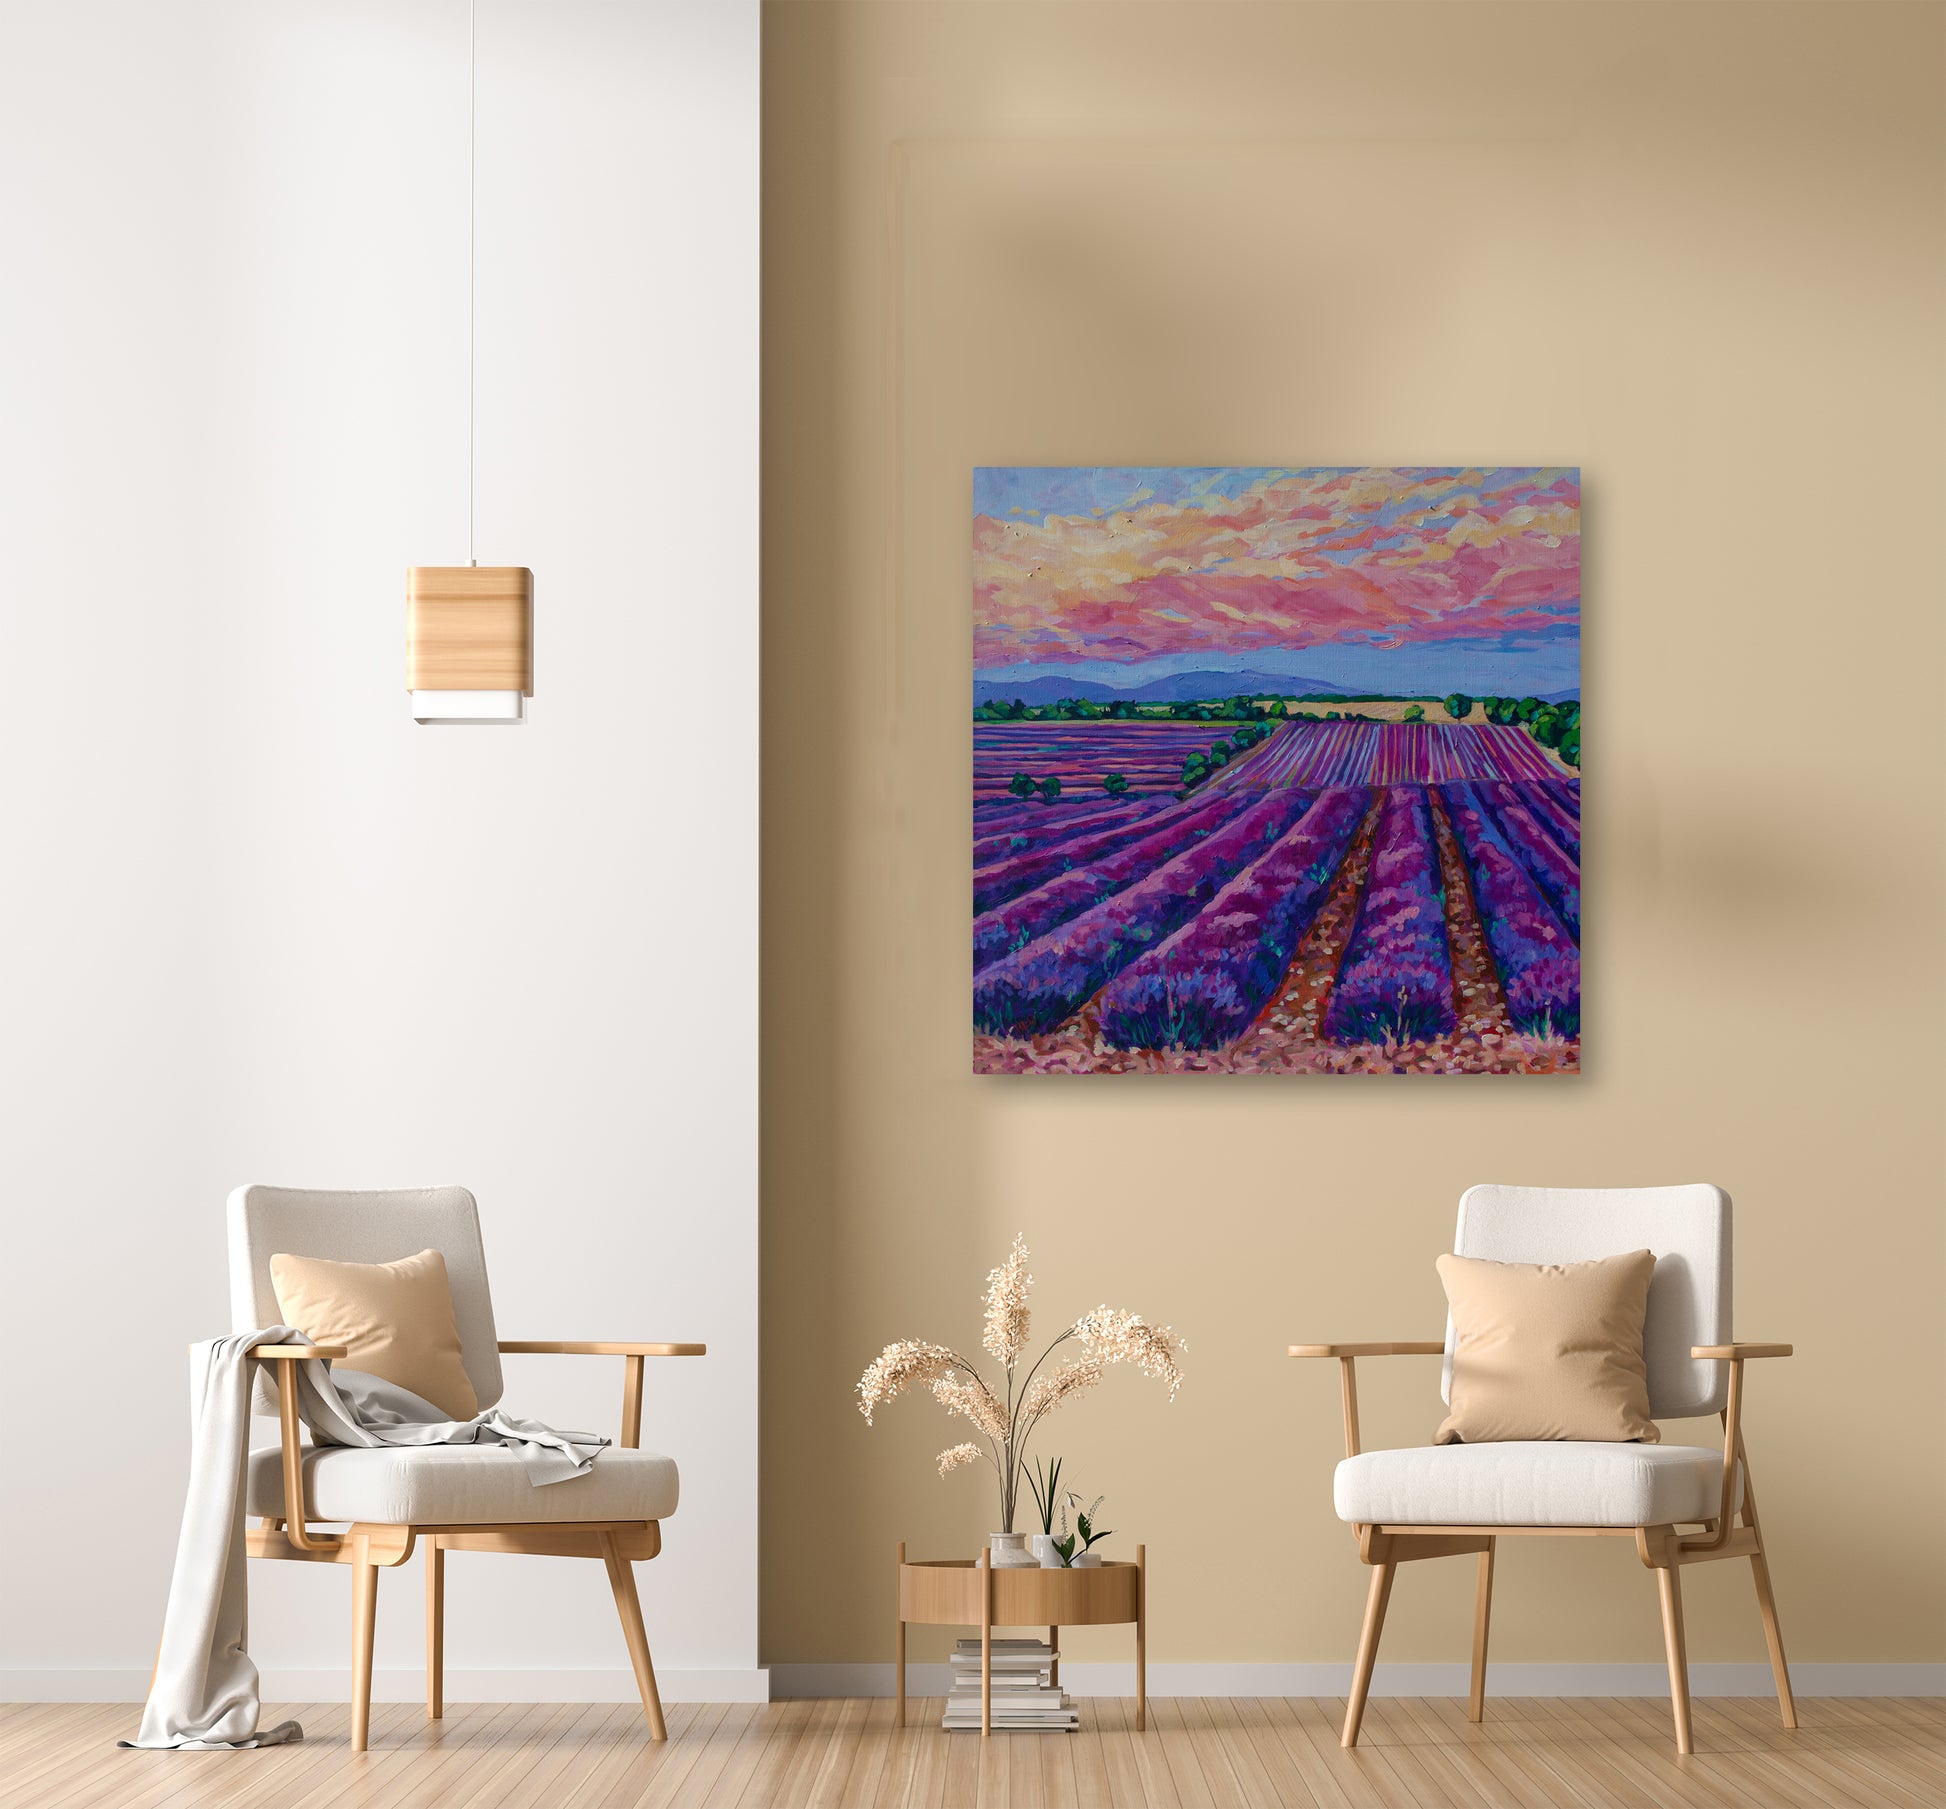 Large lavender field painting on wall in a neutral decor room